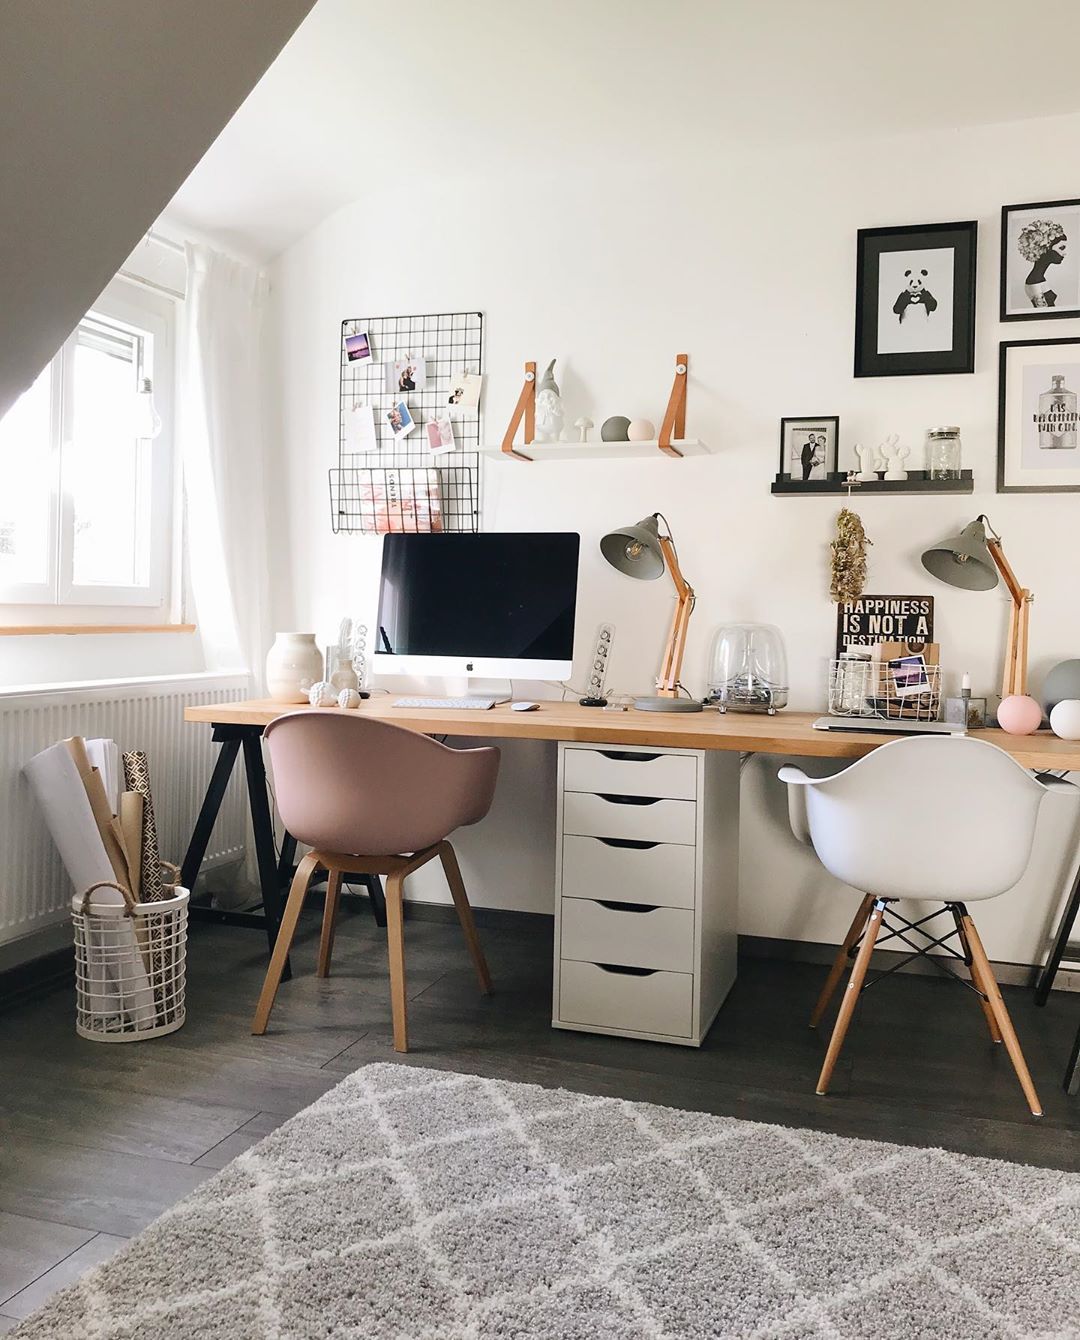 Shared Office Space Ideas For Home & Work   Extra Space Storage